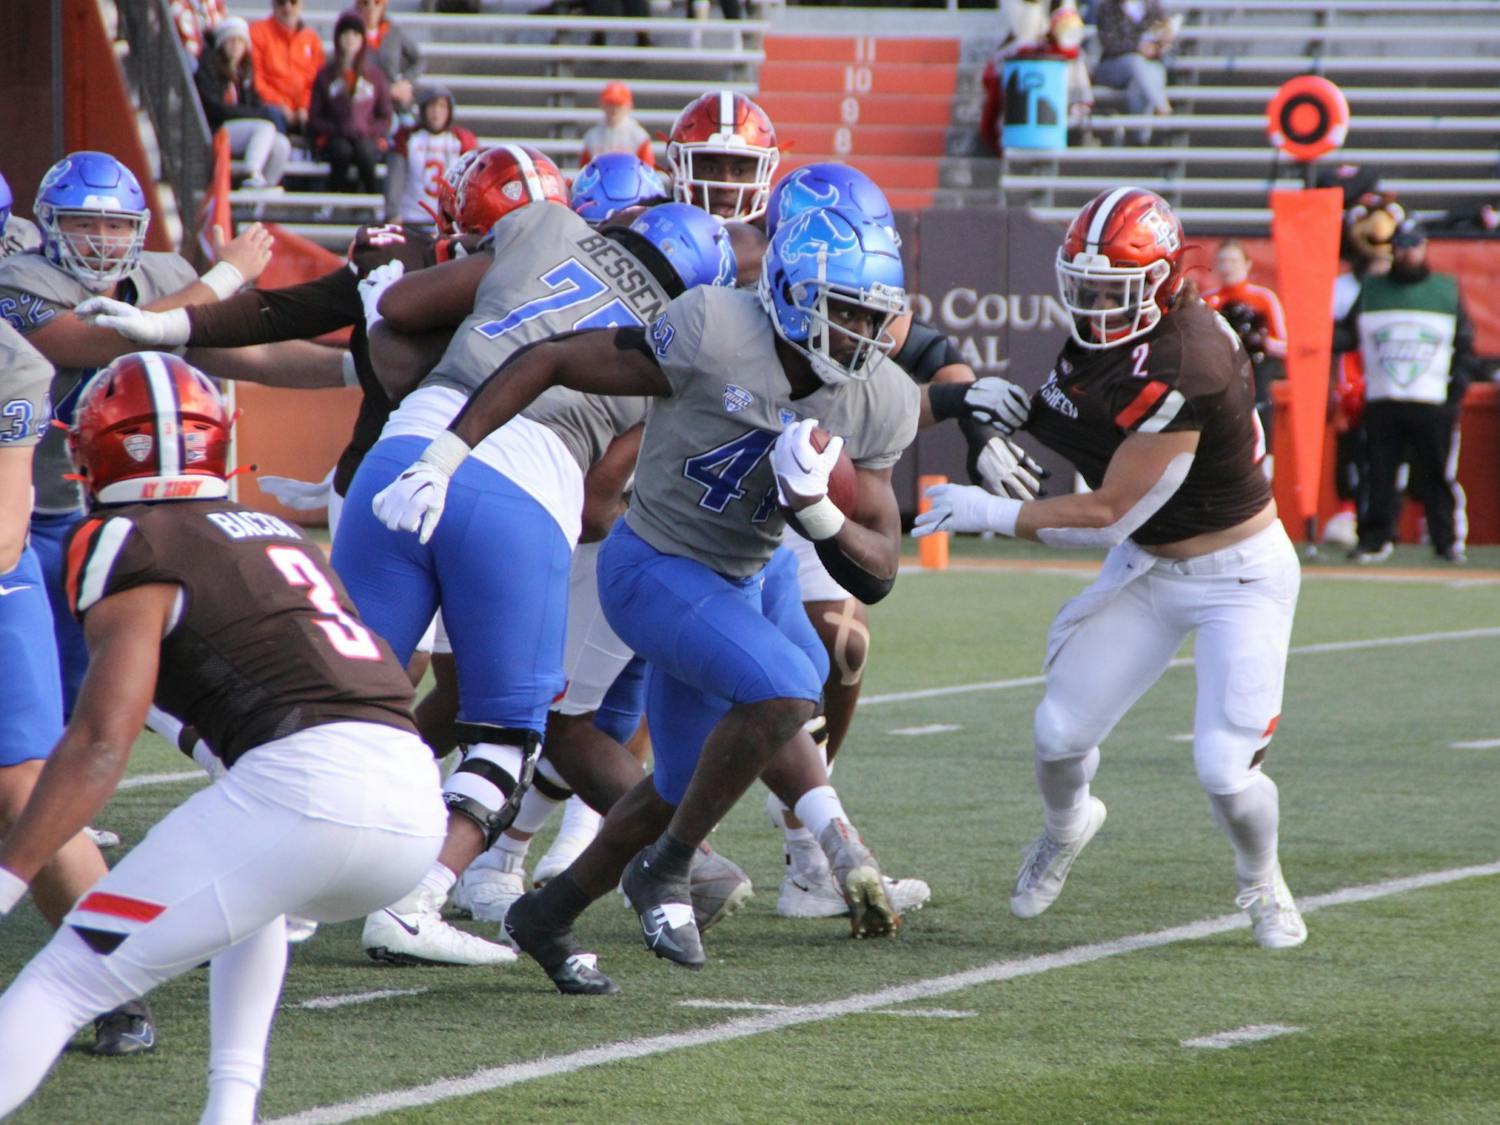 Redshirt freshman Mike Washington ran for 155 yards and two touchdowns in UB’s 38-7 victory over Bowling Green on Saturday.&nbsp;